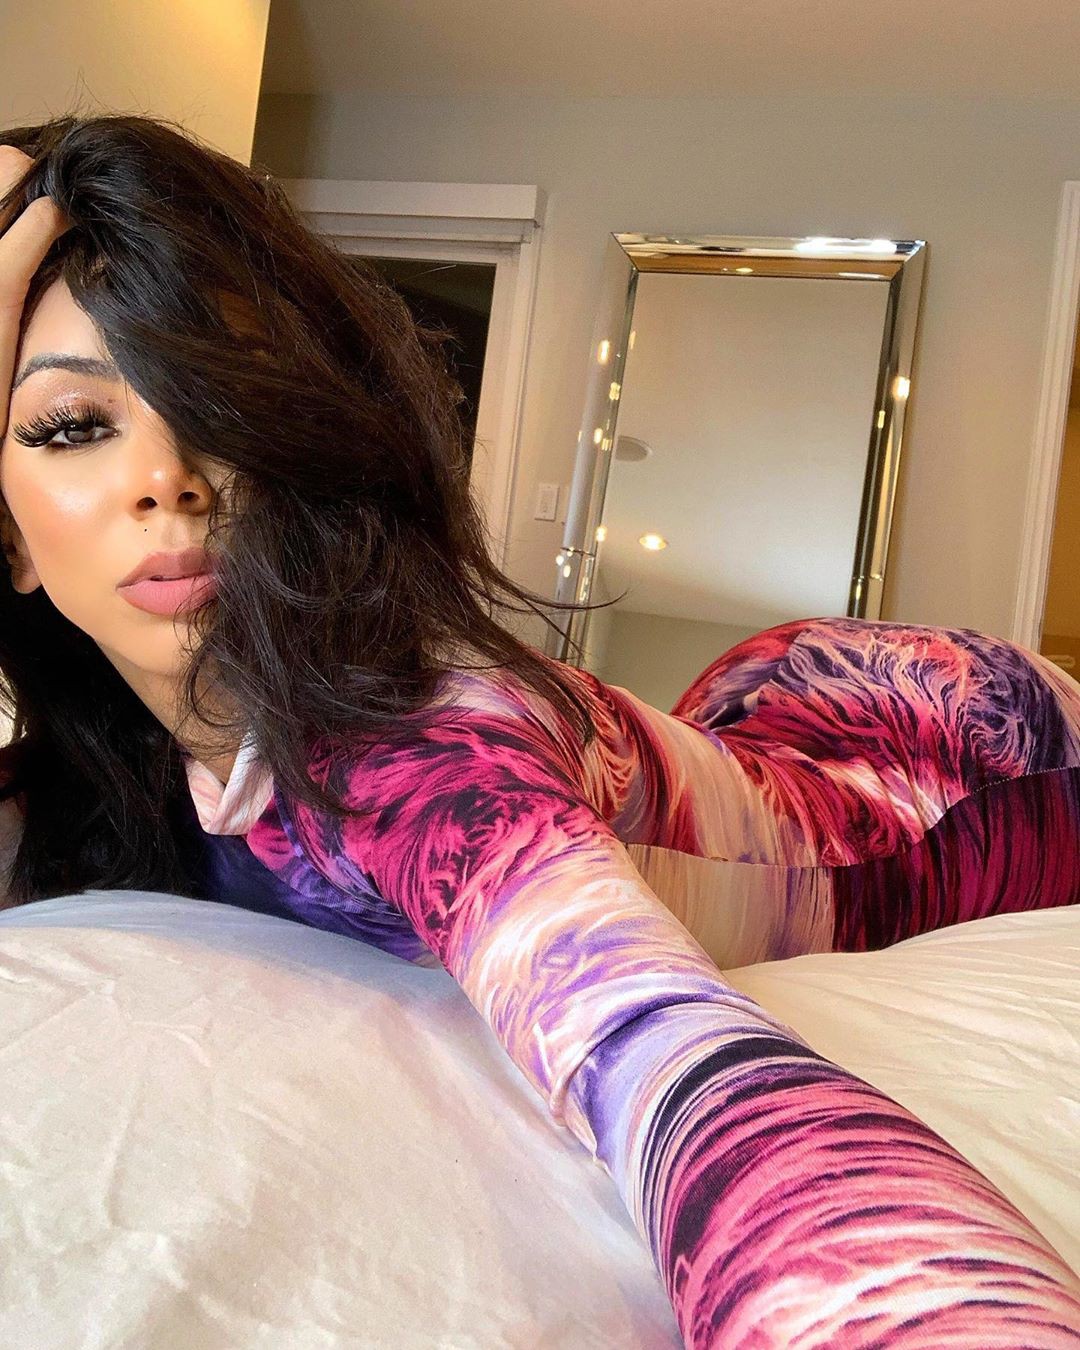 Brittany Renner legs pic, Dark Black Hairs, Long Hairstyle Girls: Brown hair,  Purple And Pink Outfit  